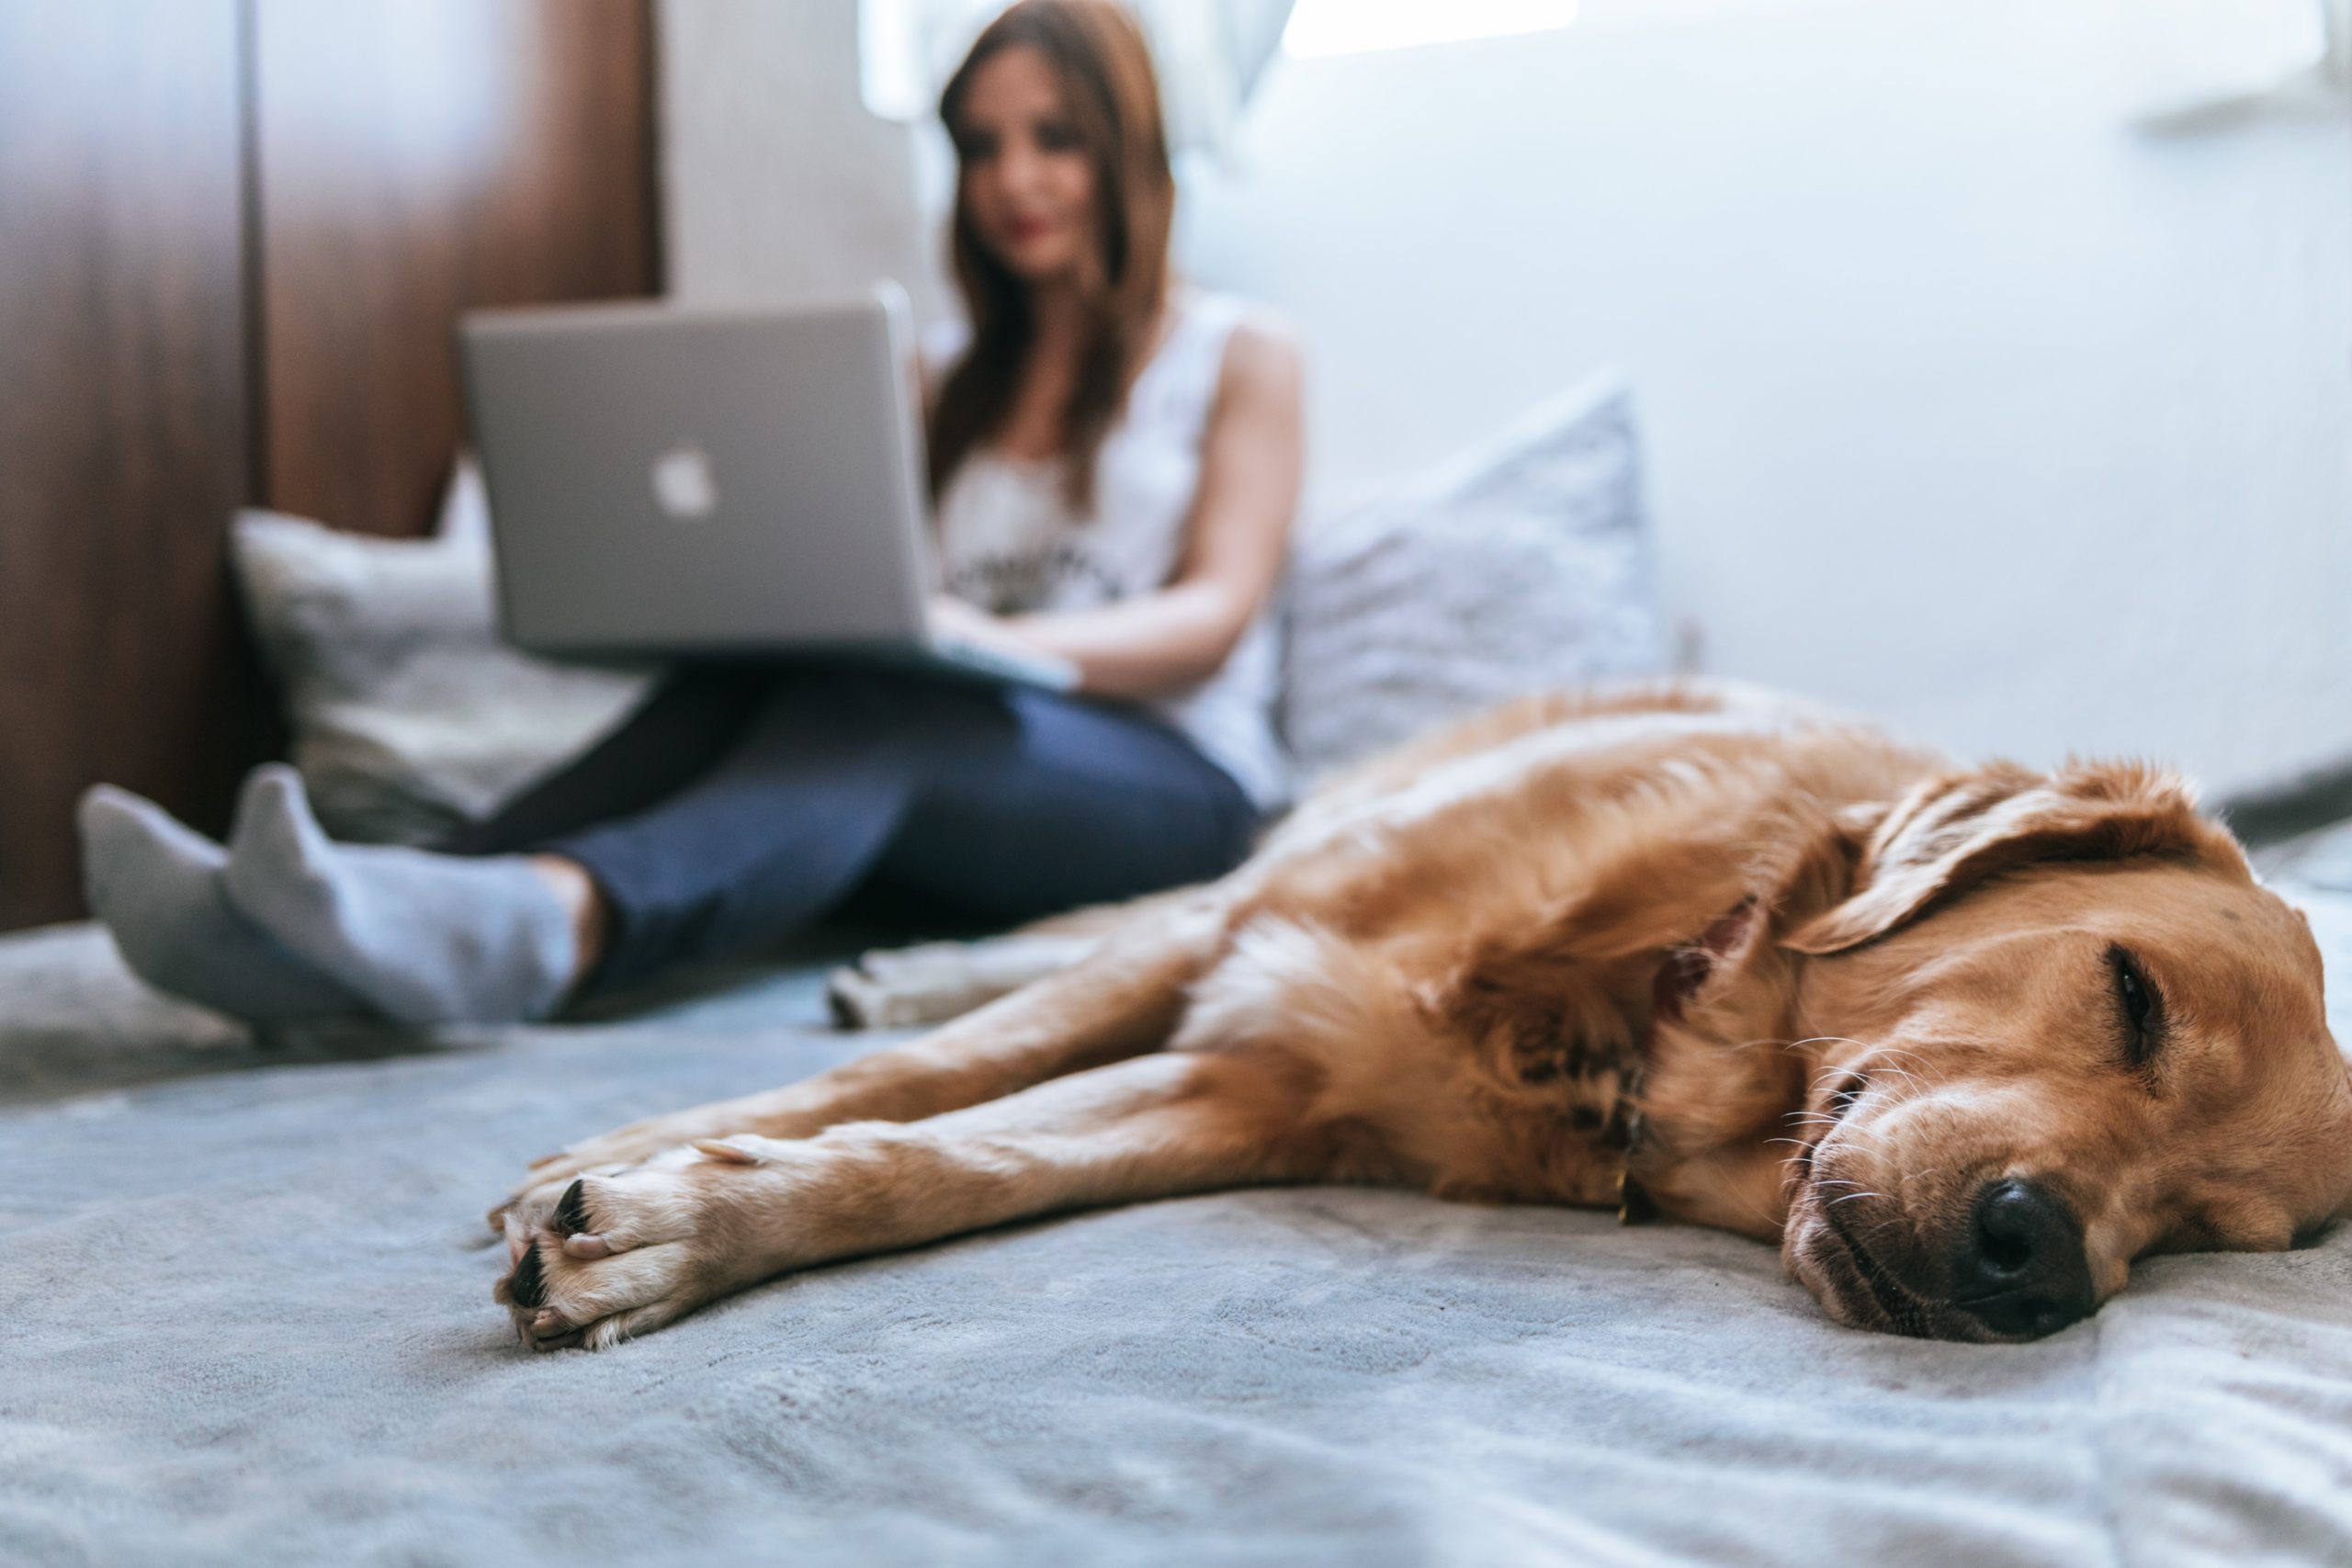 A woman working on her laptop with a golden retriever lying beside her on the bed.